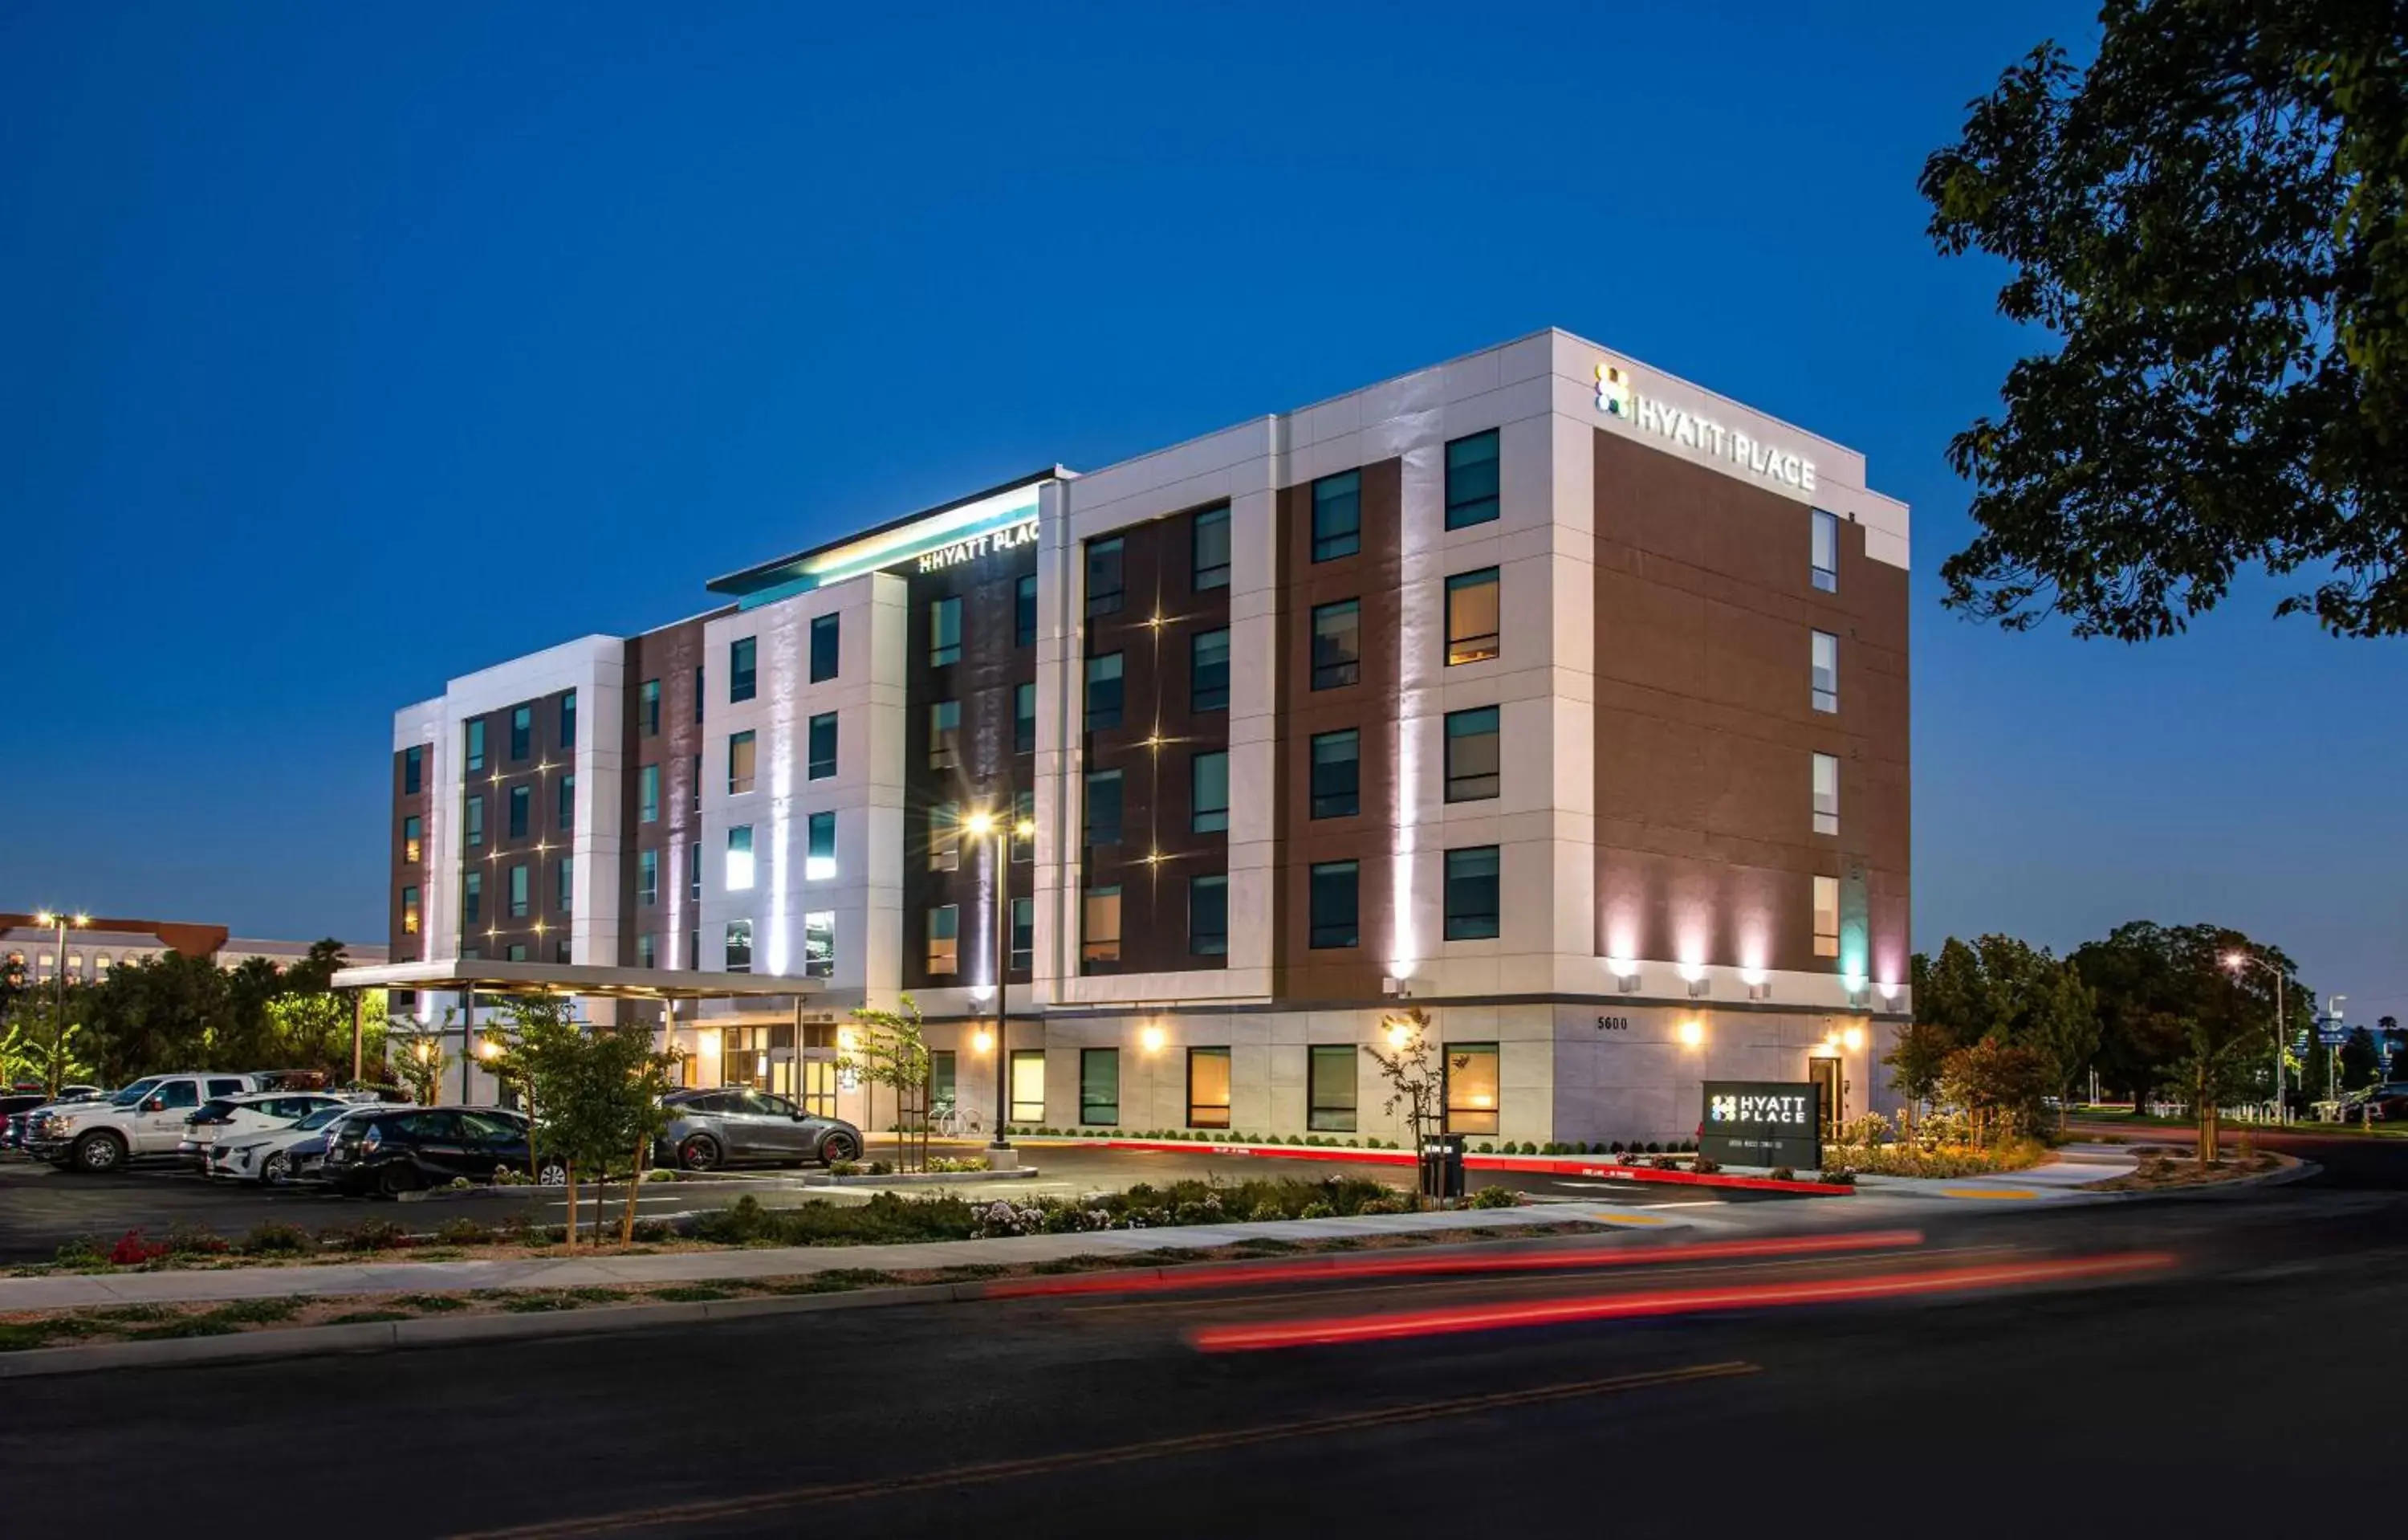 Property Building in Hyatt Place Newark-Silicon Valley